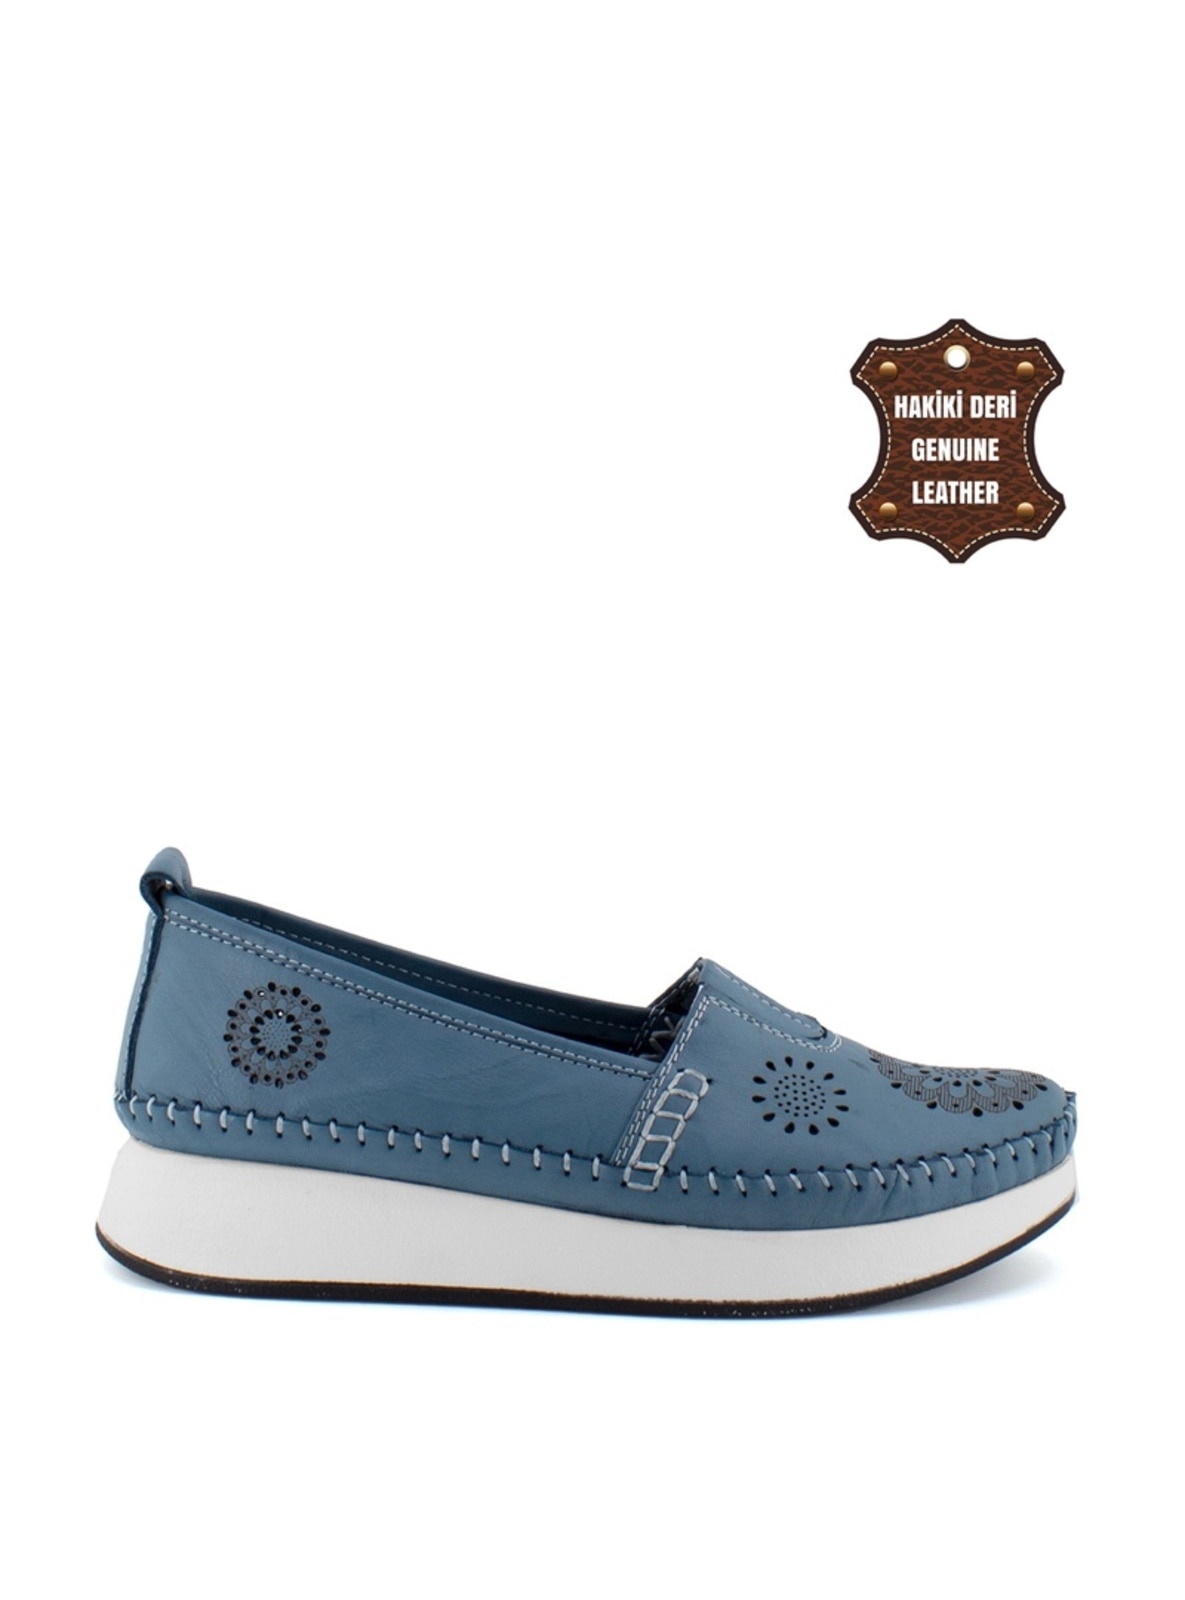  Blue Casual Shoes